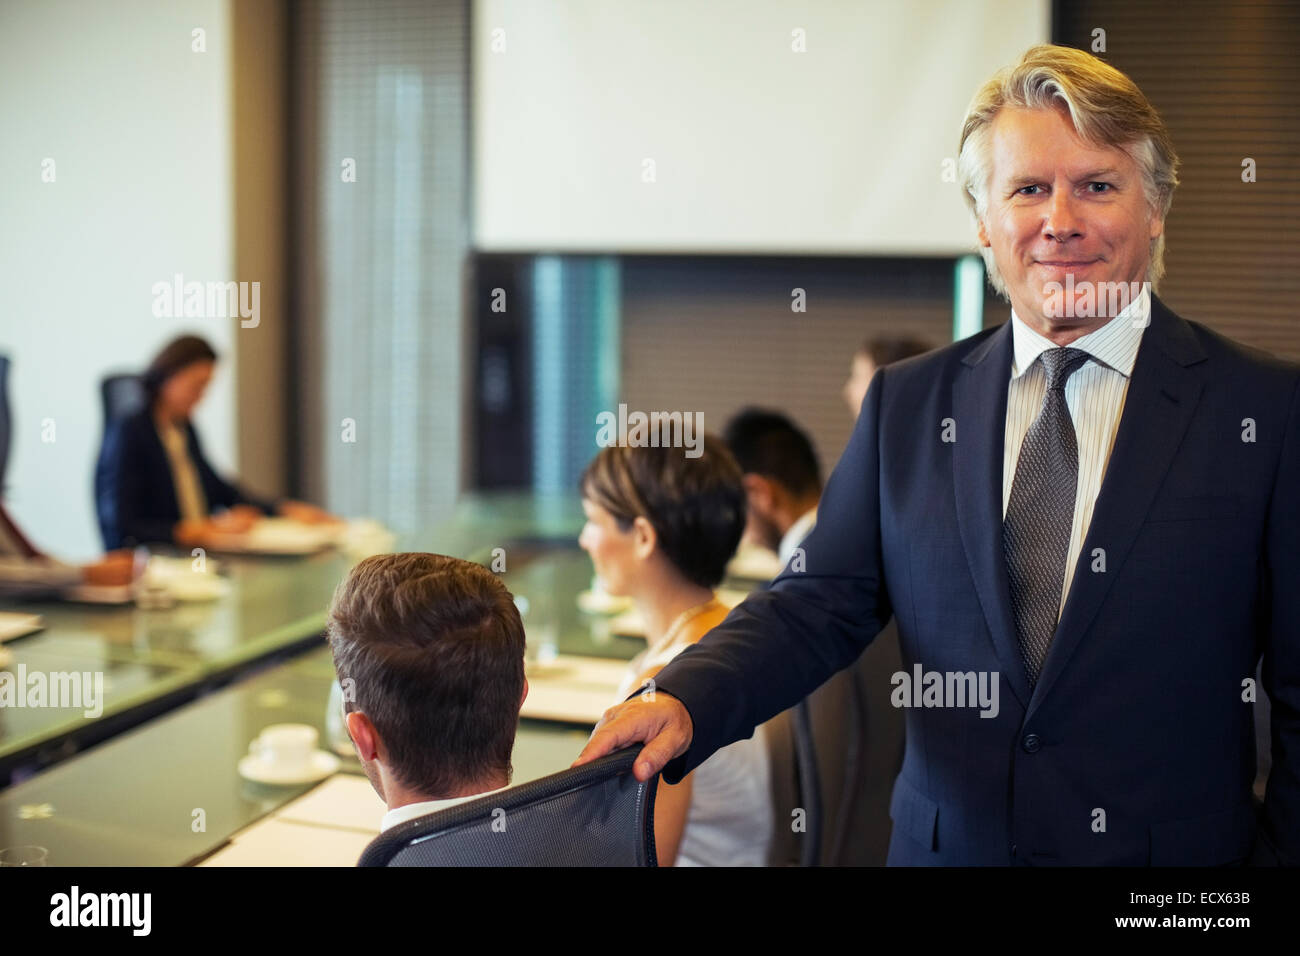 Portrait of businessman standing in conference room with colleagues in background Stock Photo